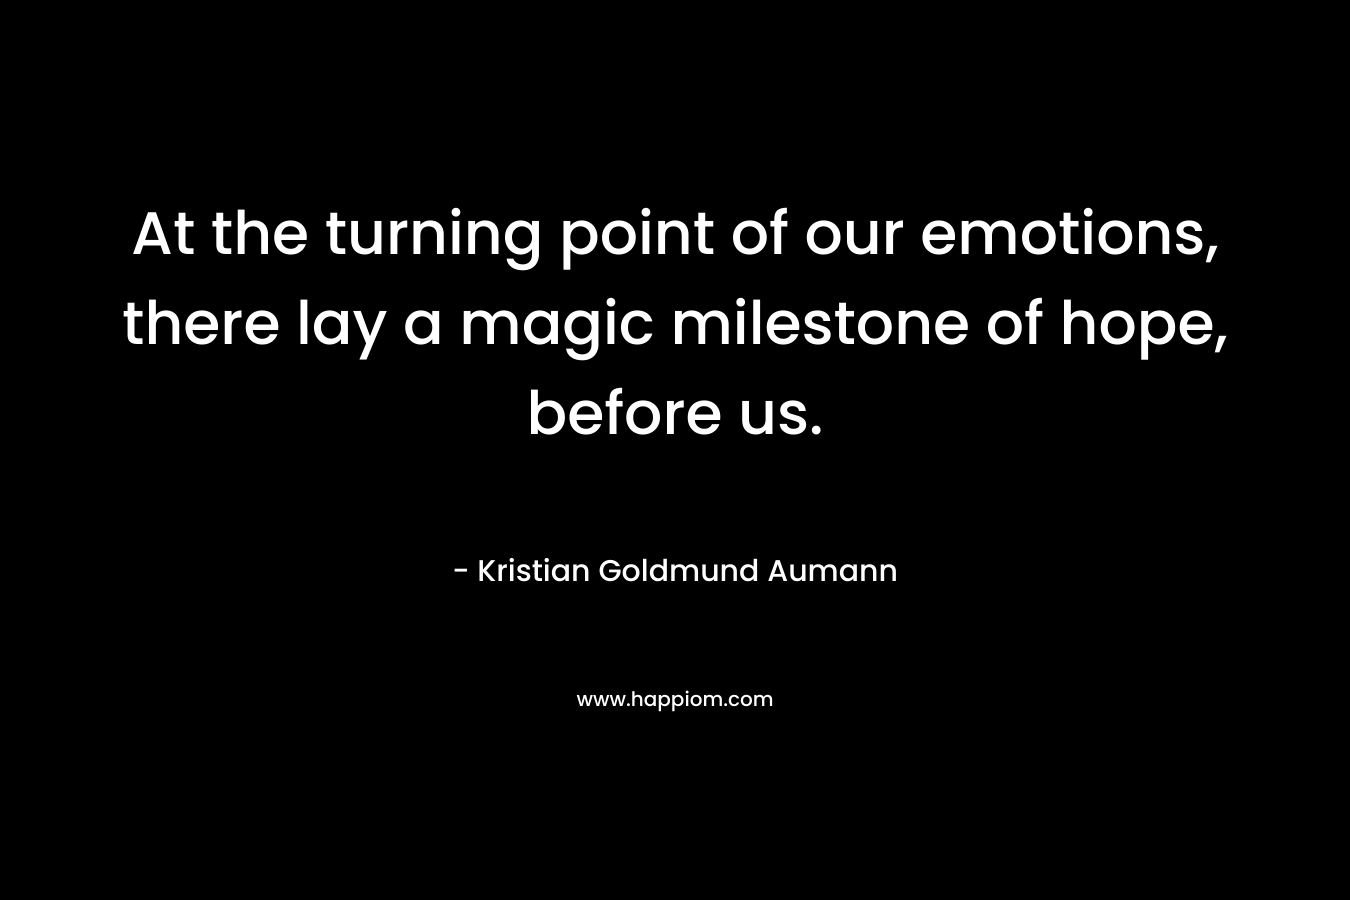 At the turning point of our emotions, there lay a magic milestone of hope, before us. – Kristian Goldmund Aumann